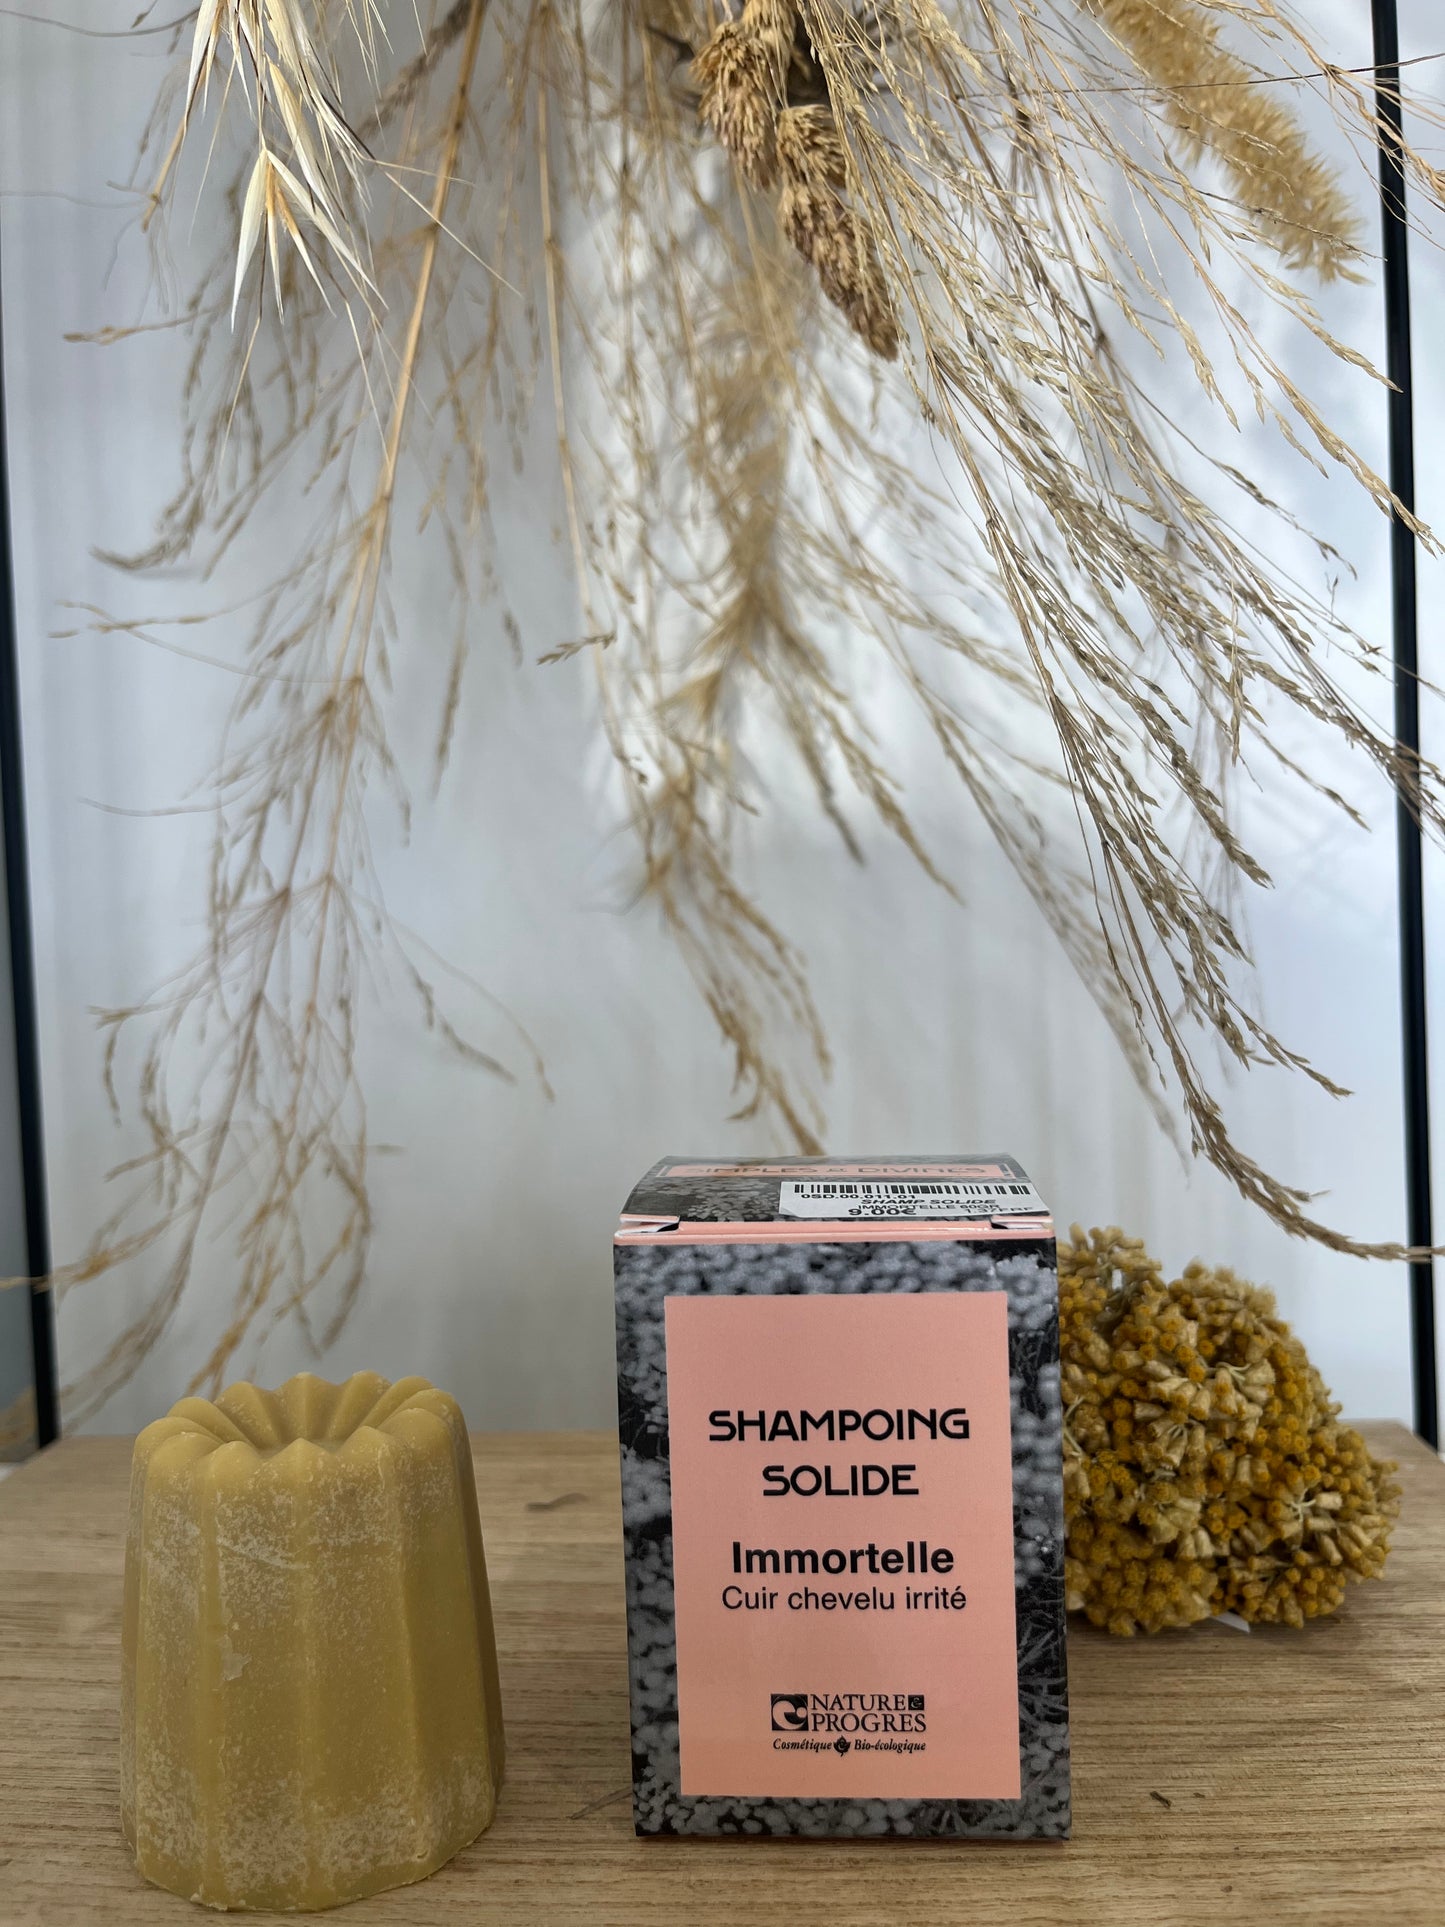 Les Simples & Divines - Le Shampoing Solide Immortelle